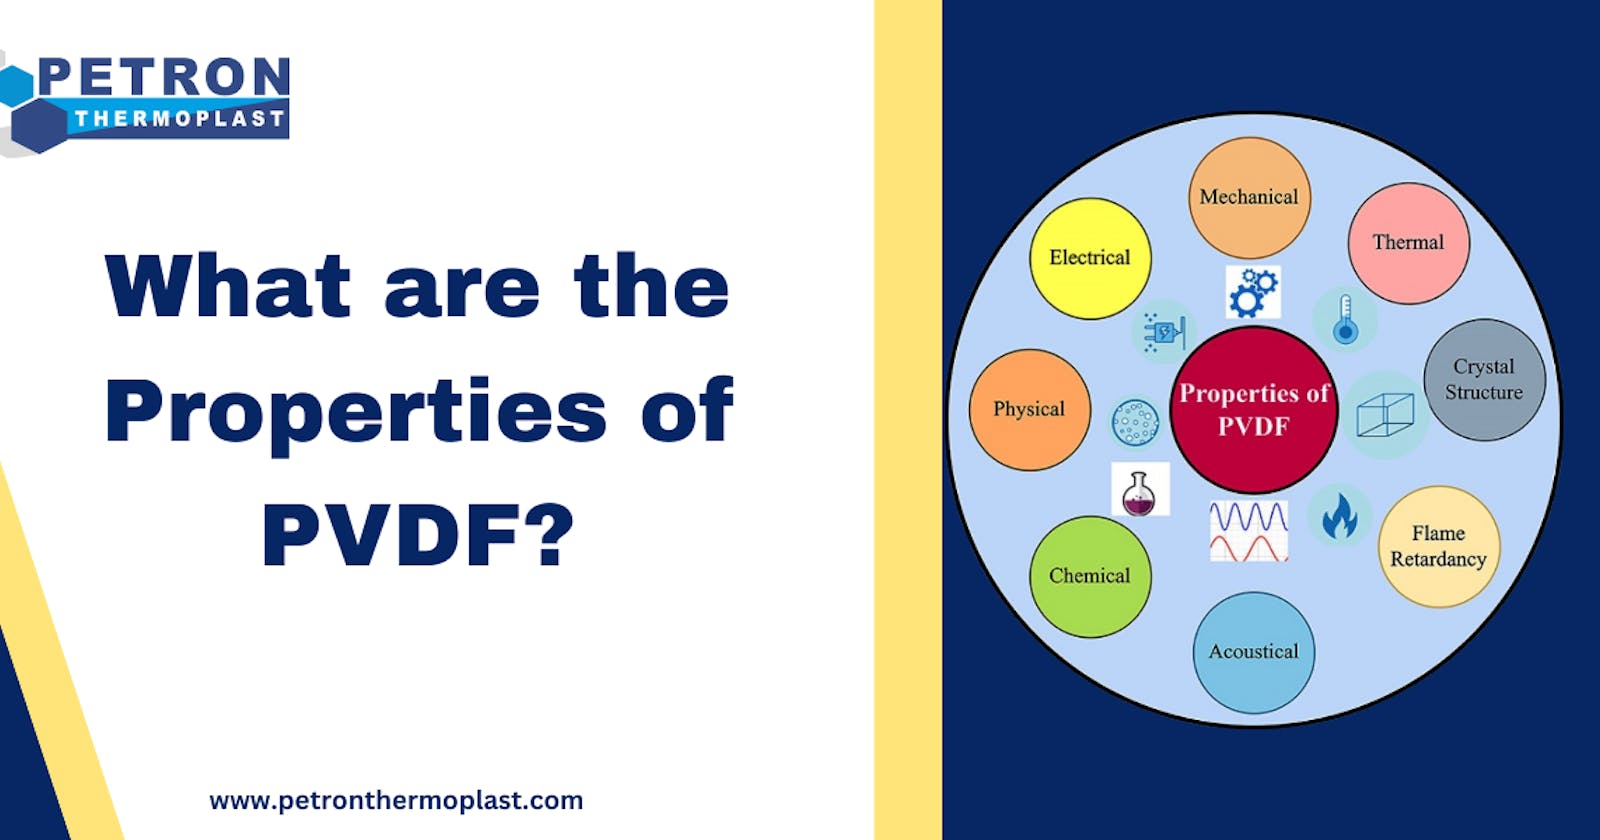 What are the Properties of PVDF?